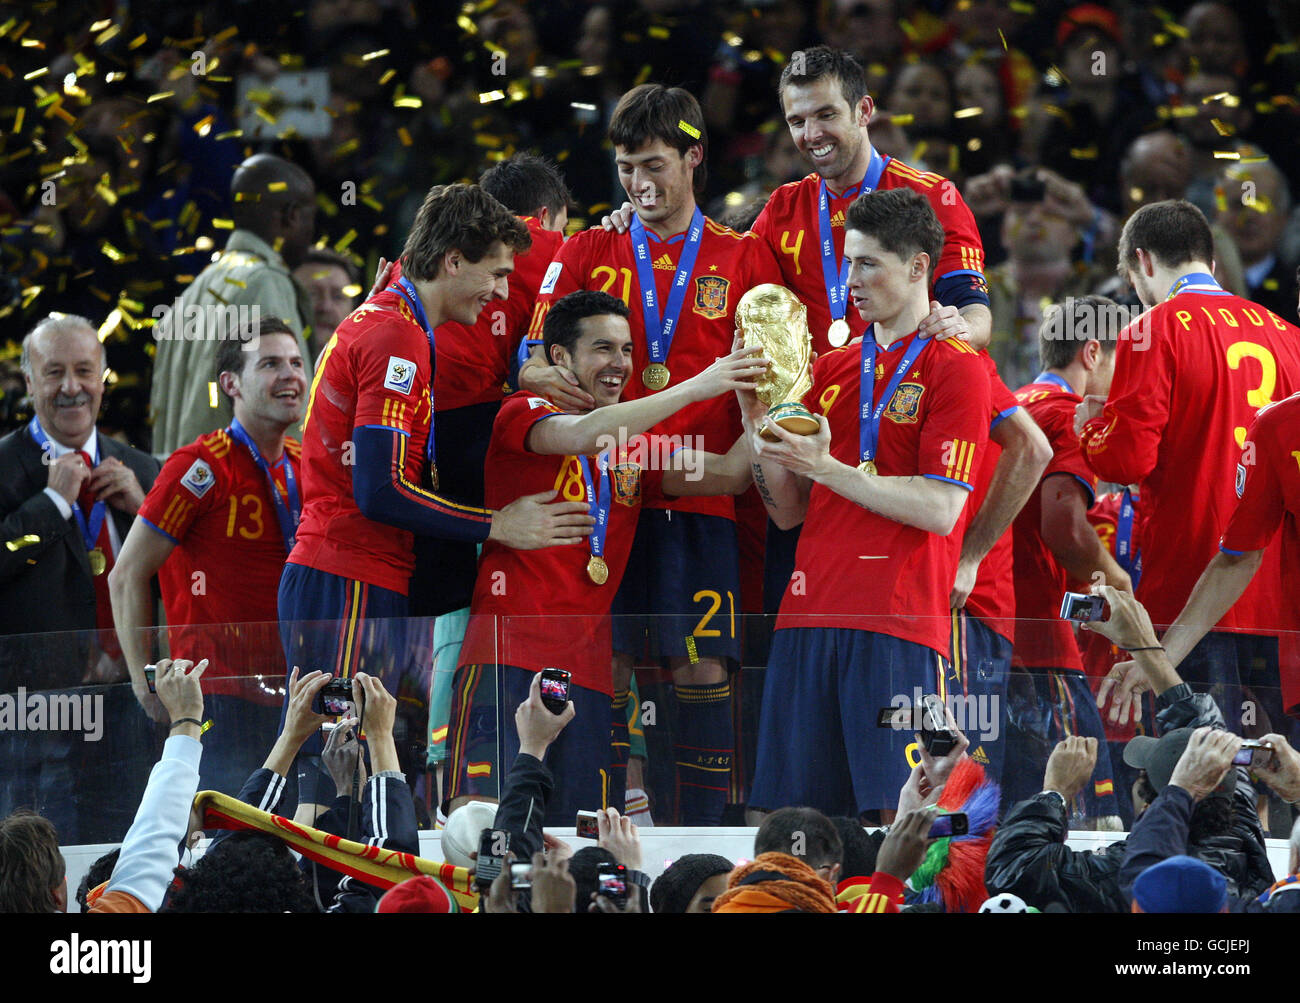 Soccer - 2010 FIFA World Cup South Africa - Final - Netherlands v Spain - Soccer City Stadium. Spain's Pedro (no18) and Fernando Torres celebrate victory as they lift the world cup trophy Stock Photo